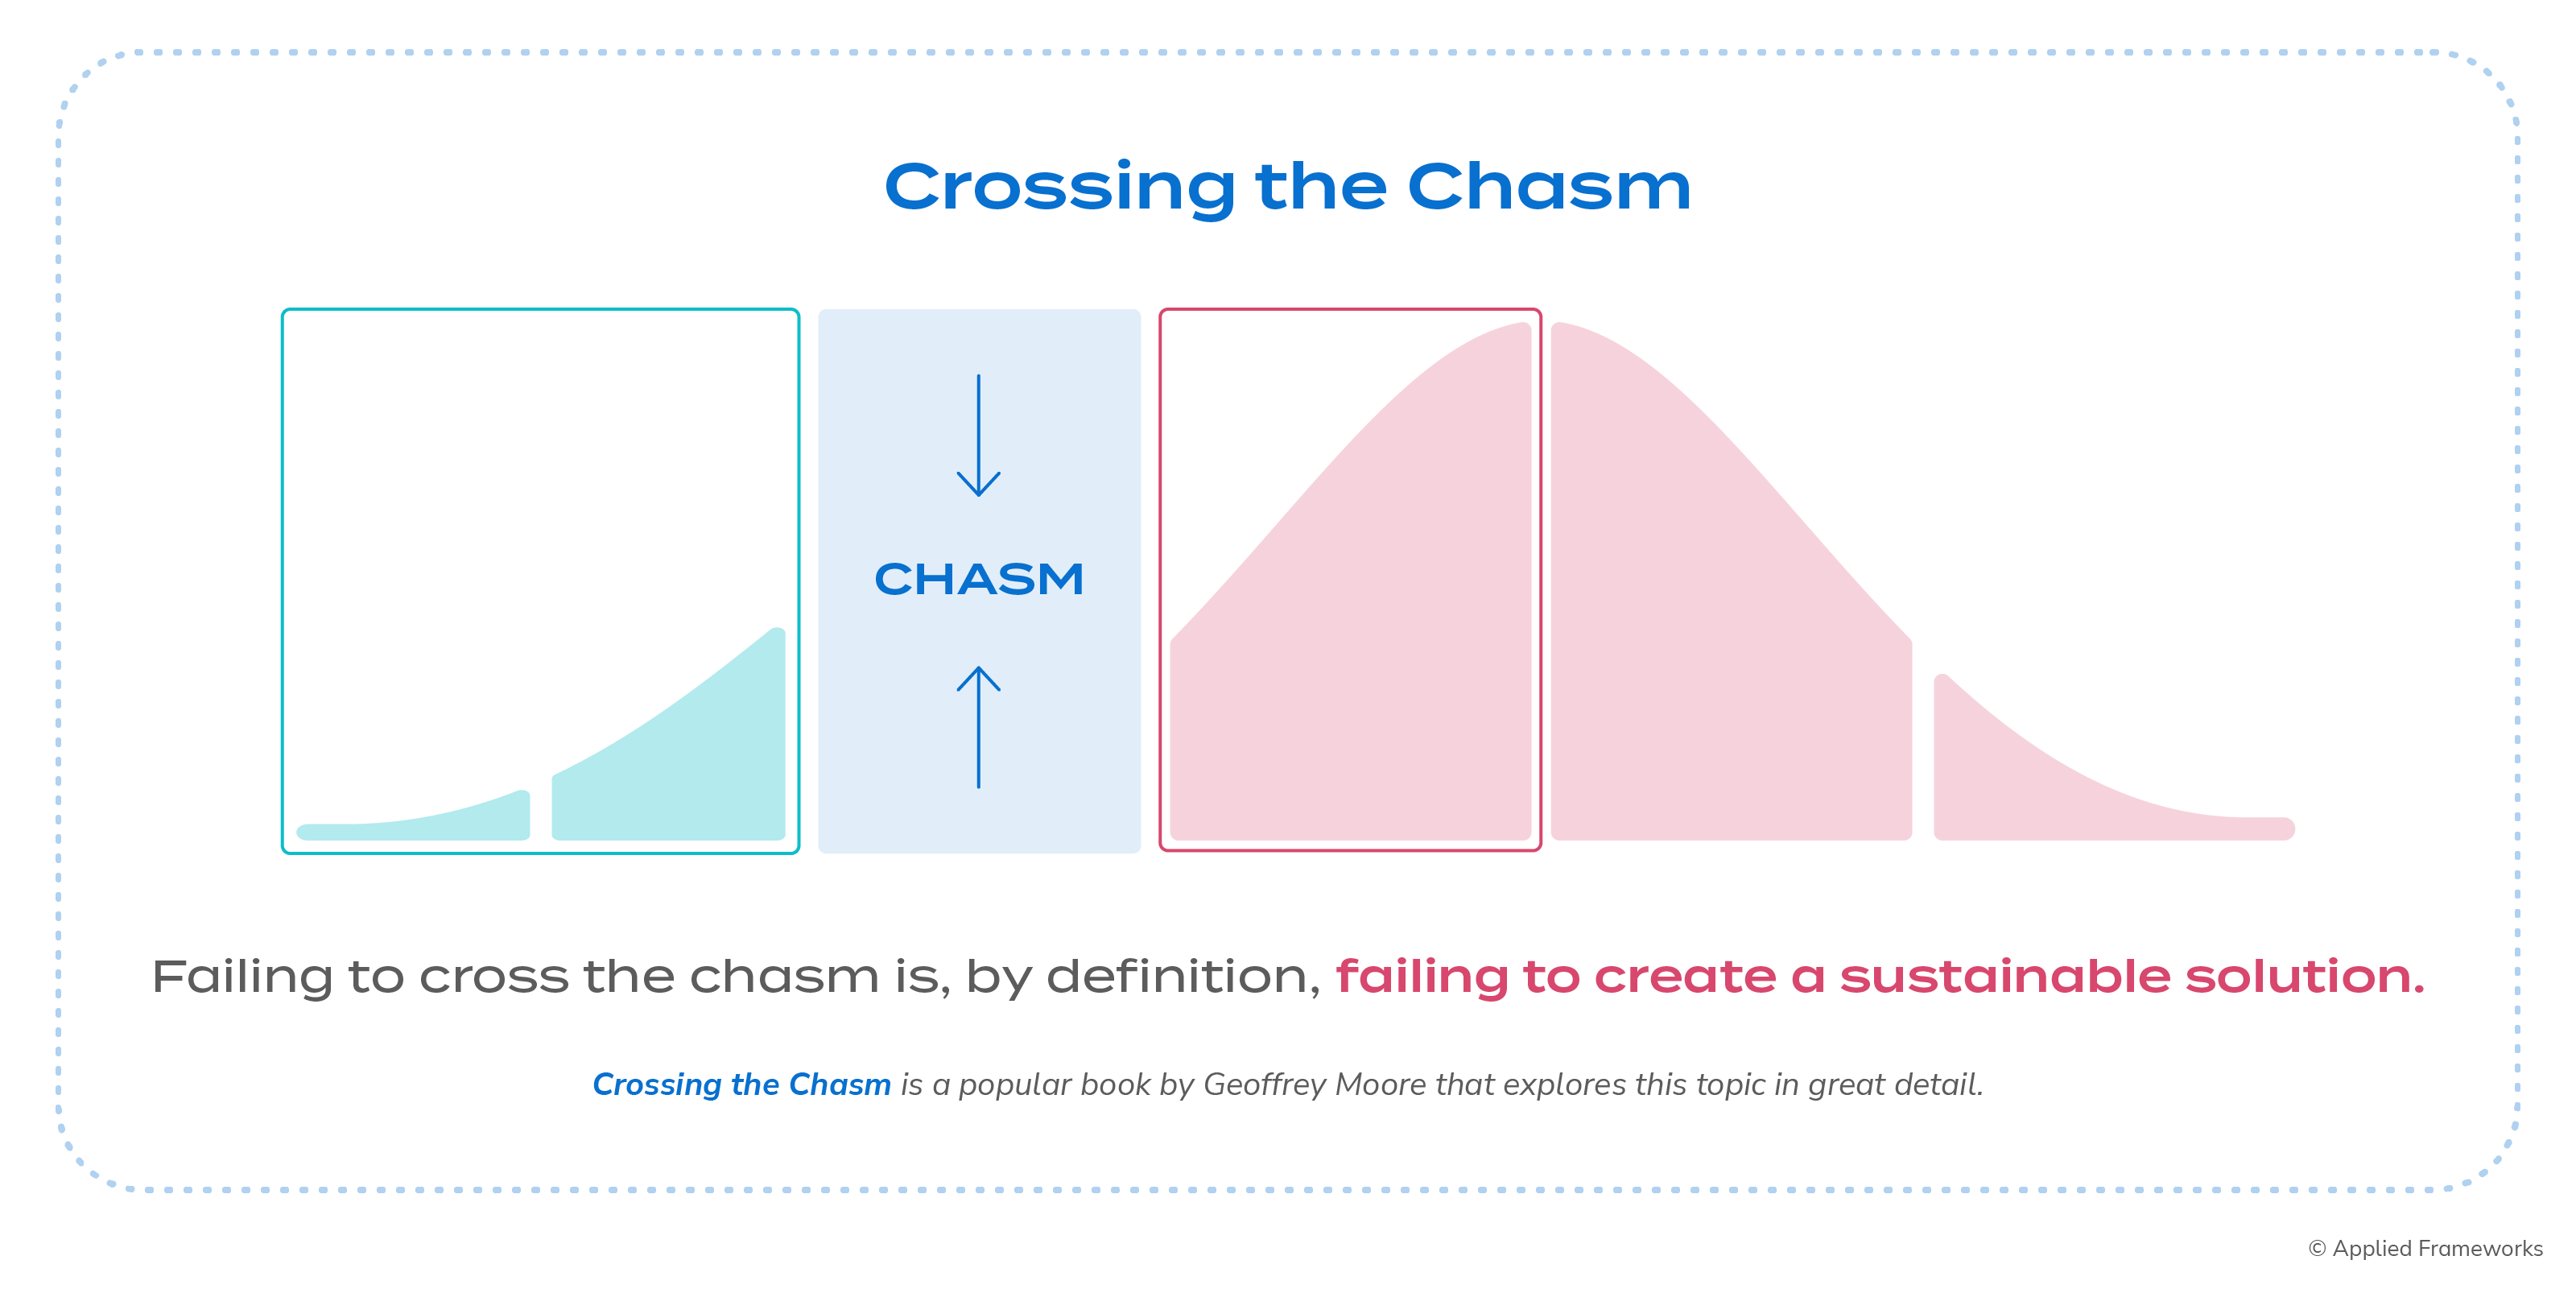 Applied Frameworks - Crossing the Chasm